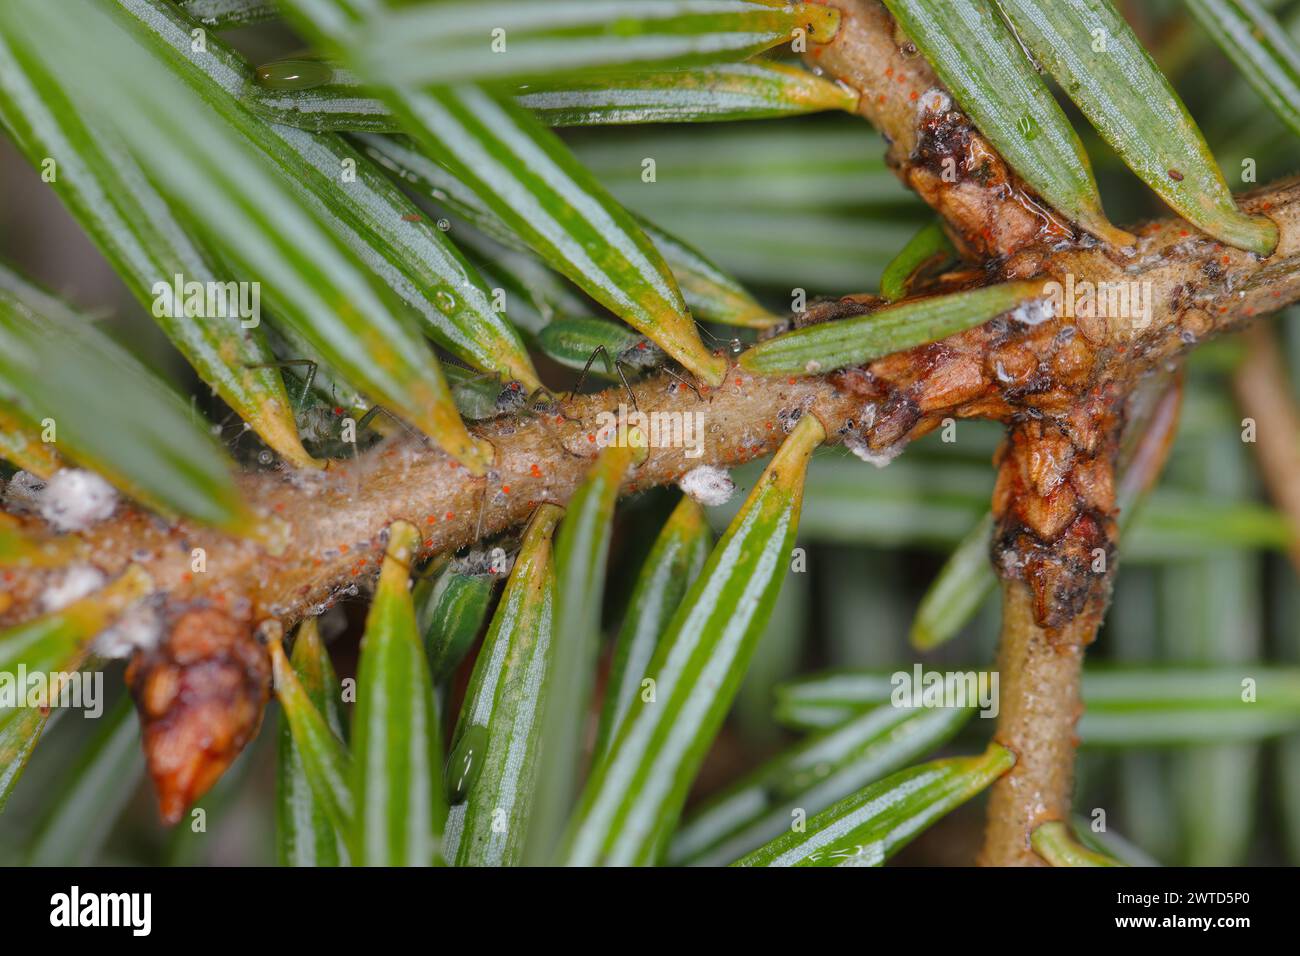 Green striped fir aphid (Cinara pectinatae) on fir (Abies alba) twig with needles. Stock Photo